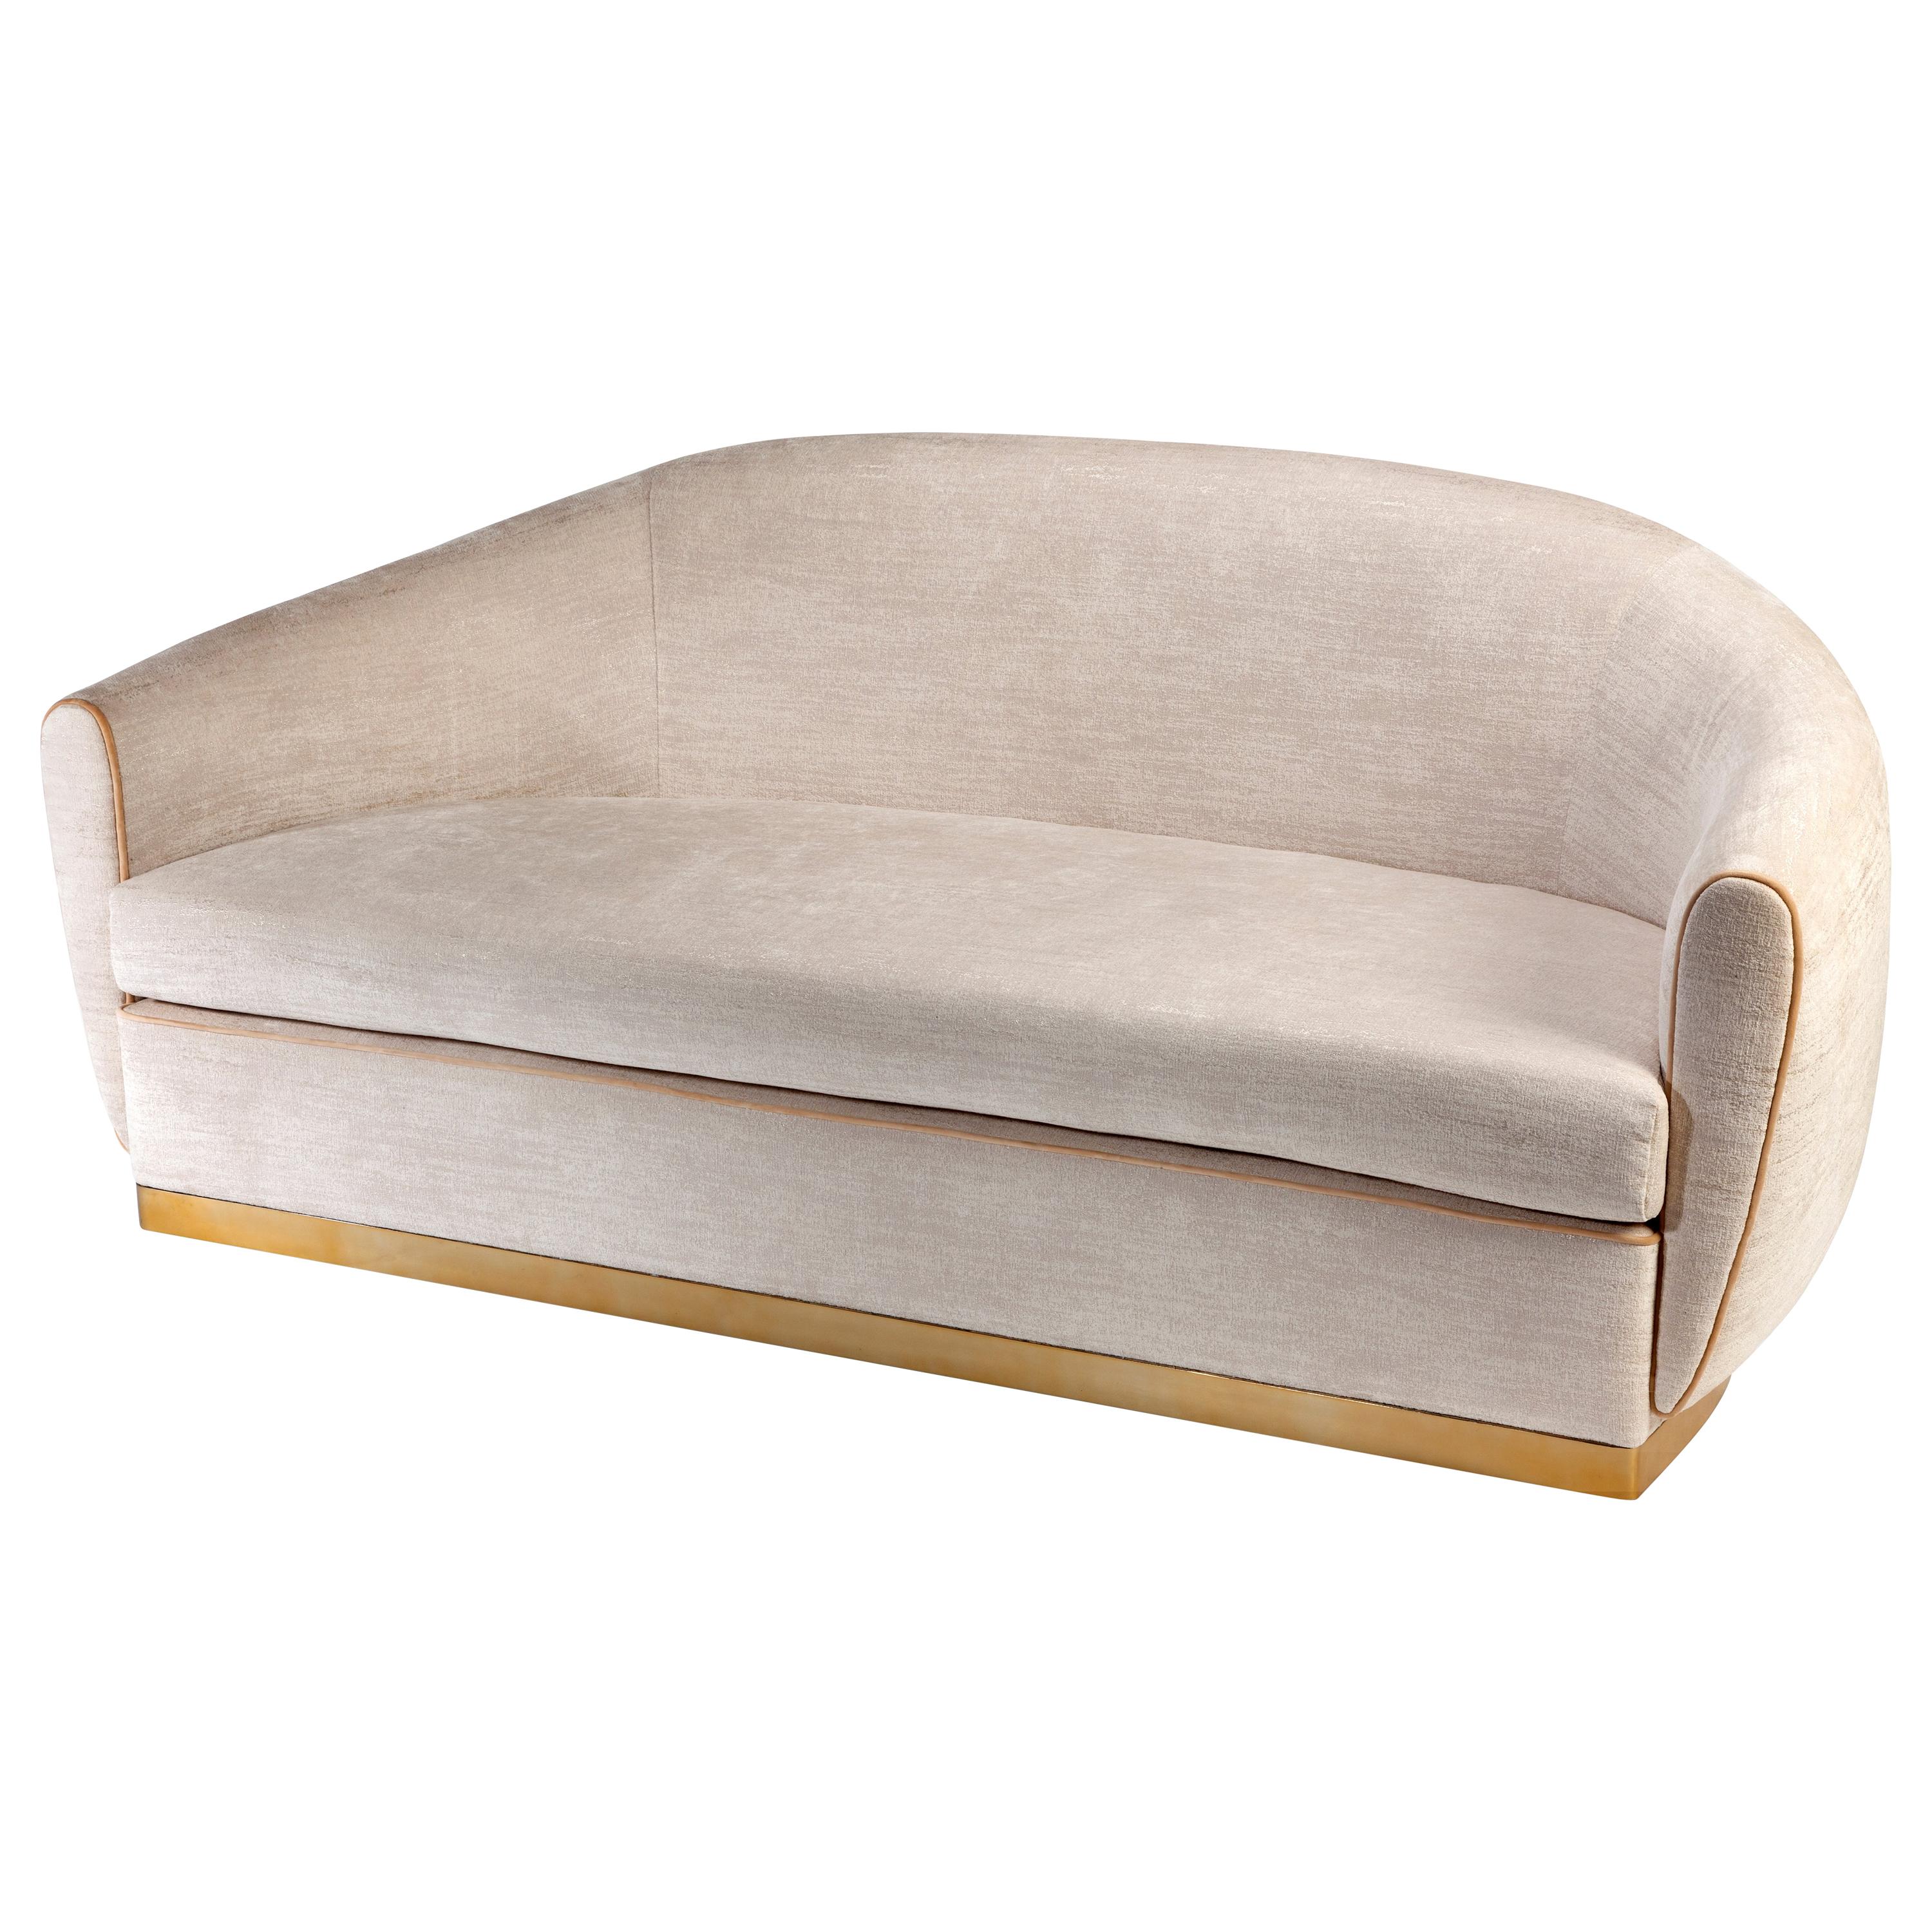 Sofa Grace 3-Seat in Beige Marka 10 Upholstery and Polished Brass Base For Sale